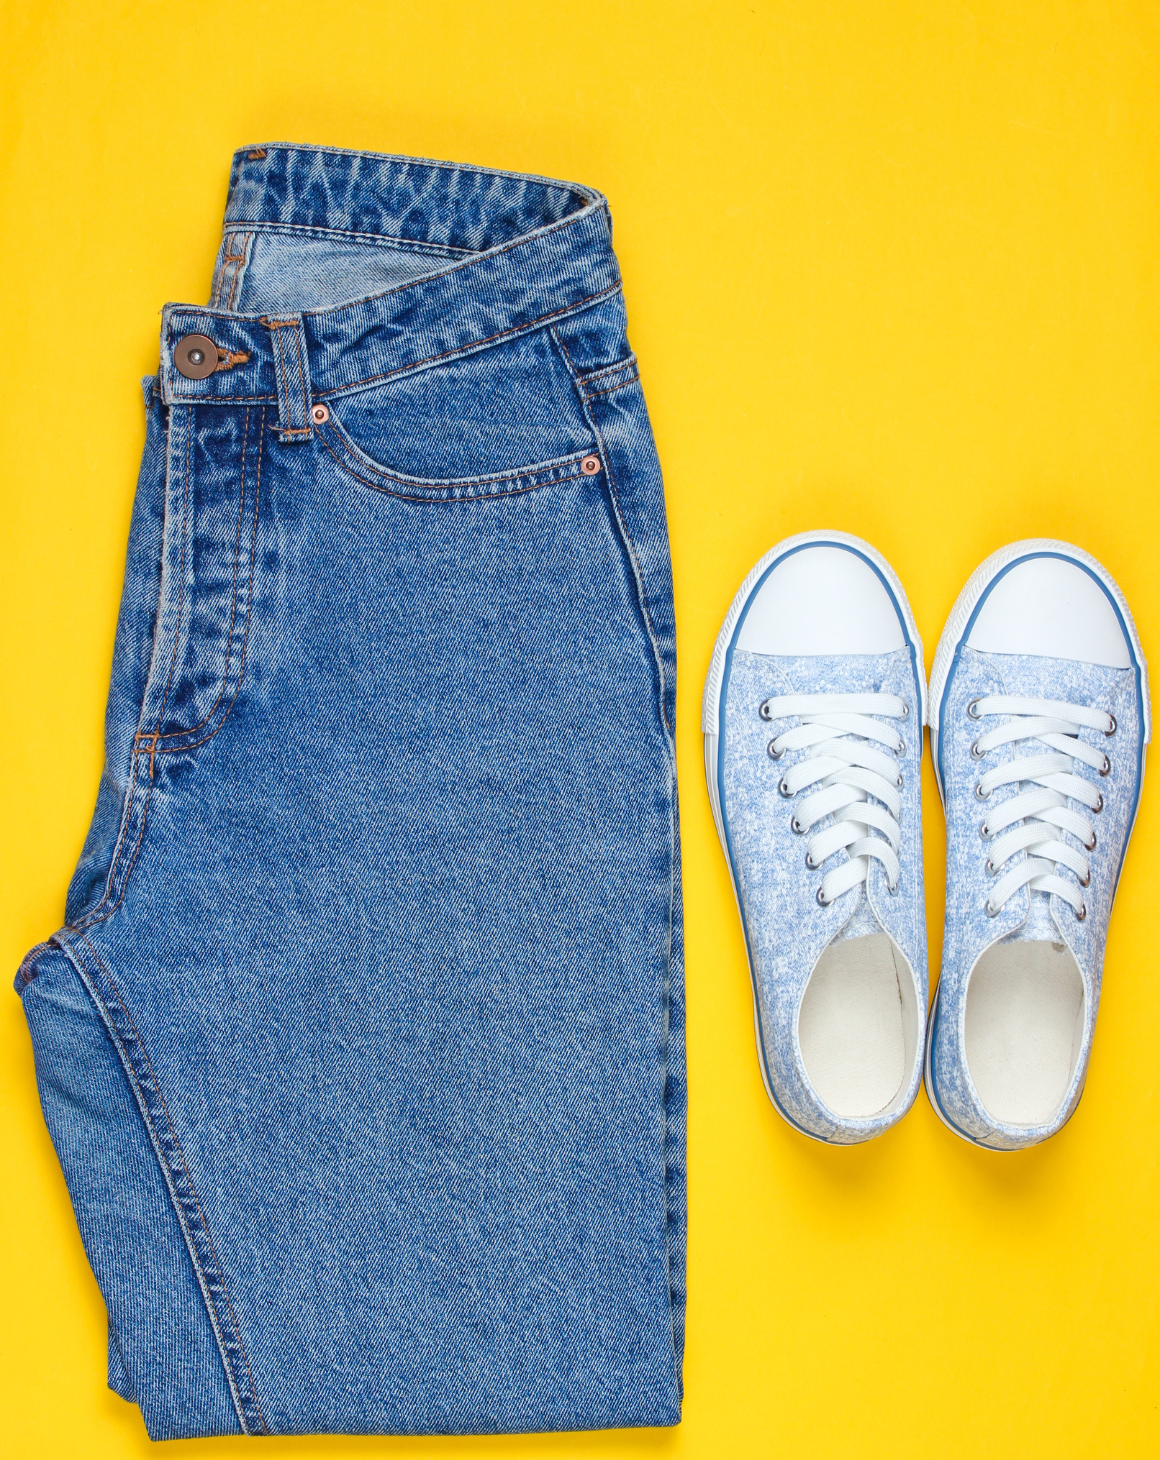 A pair of jeans and sneakers on a yellow background 